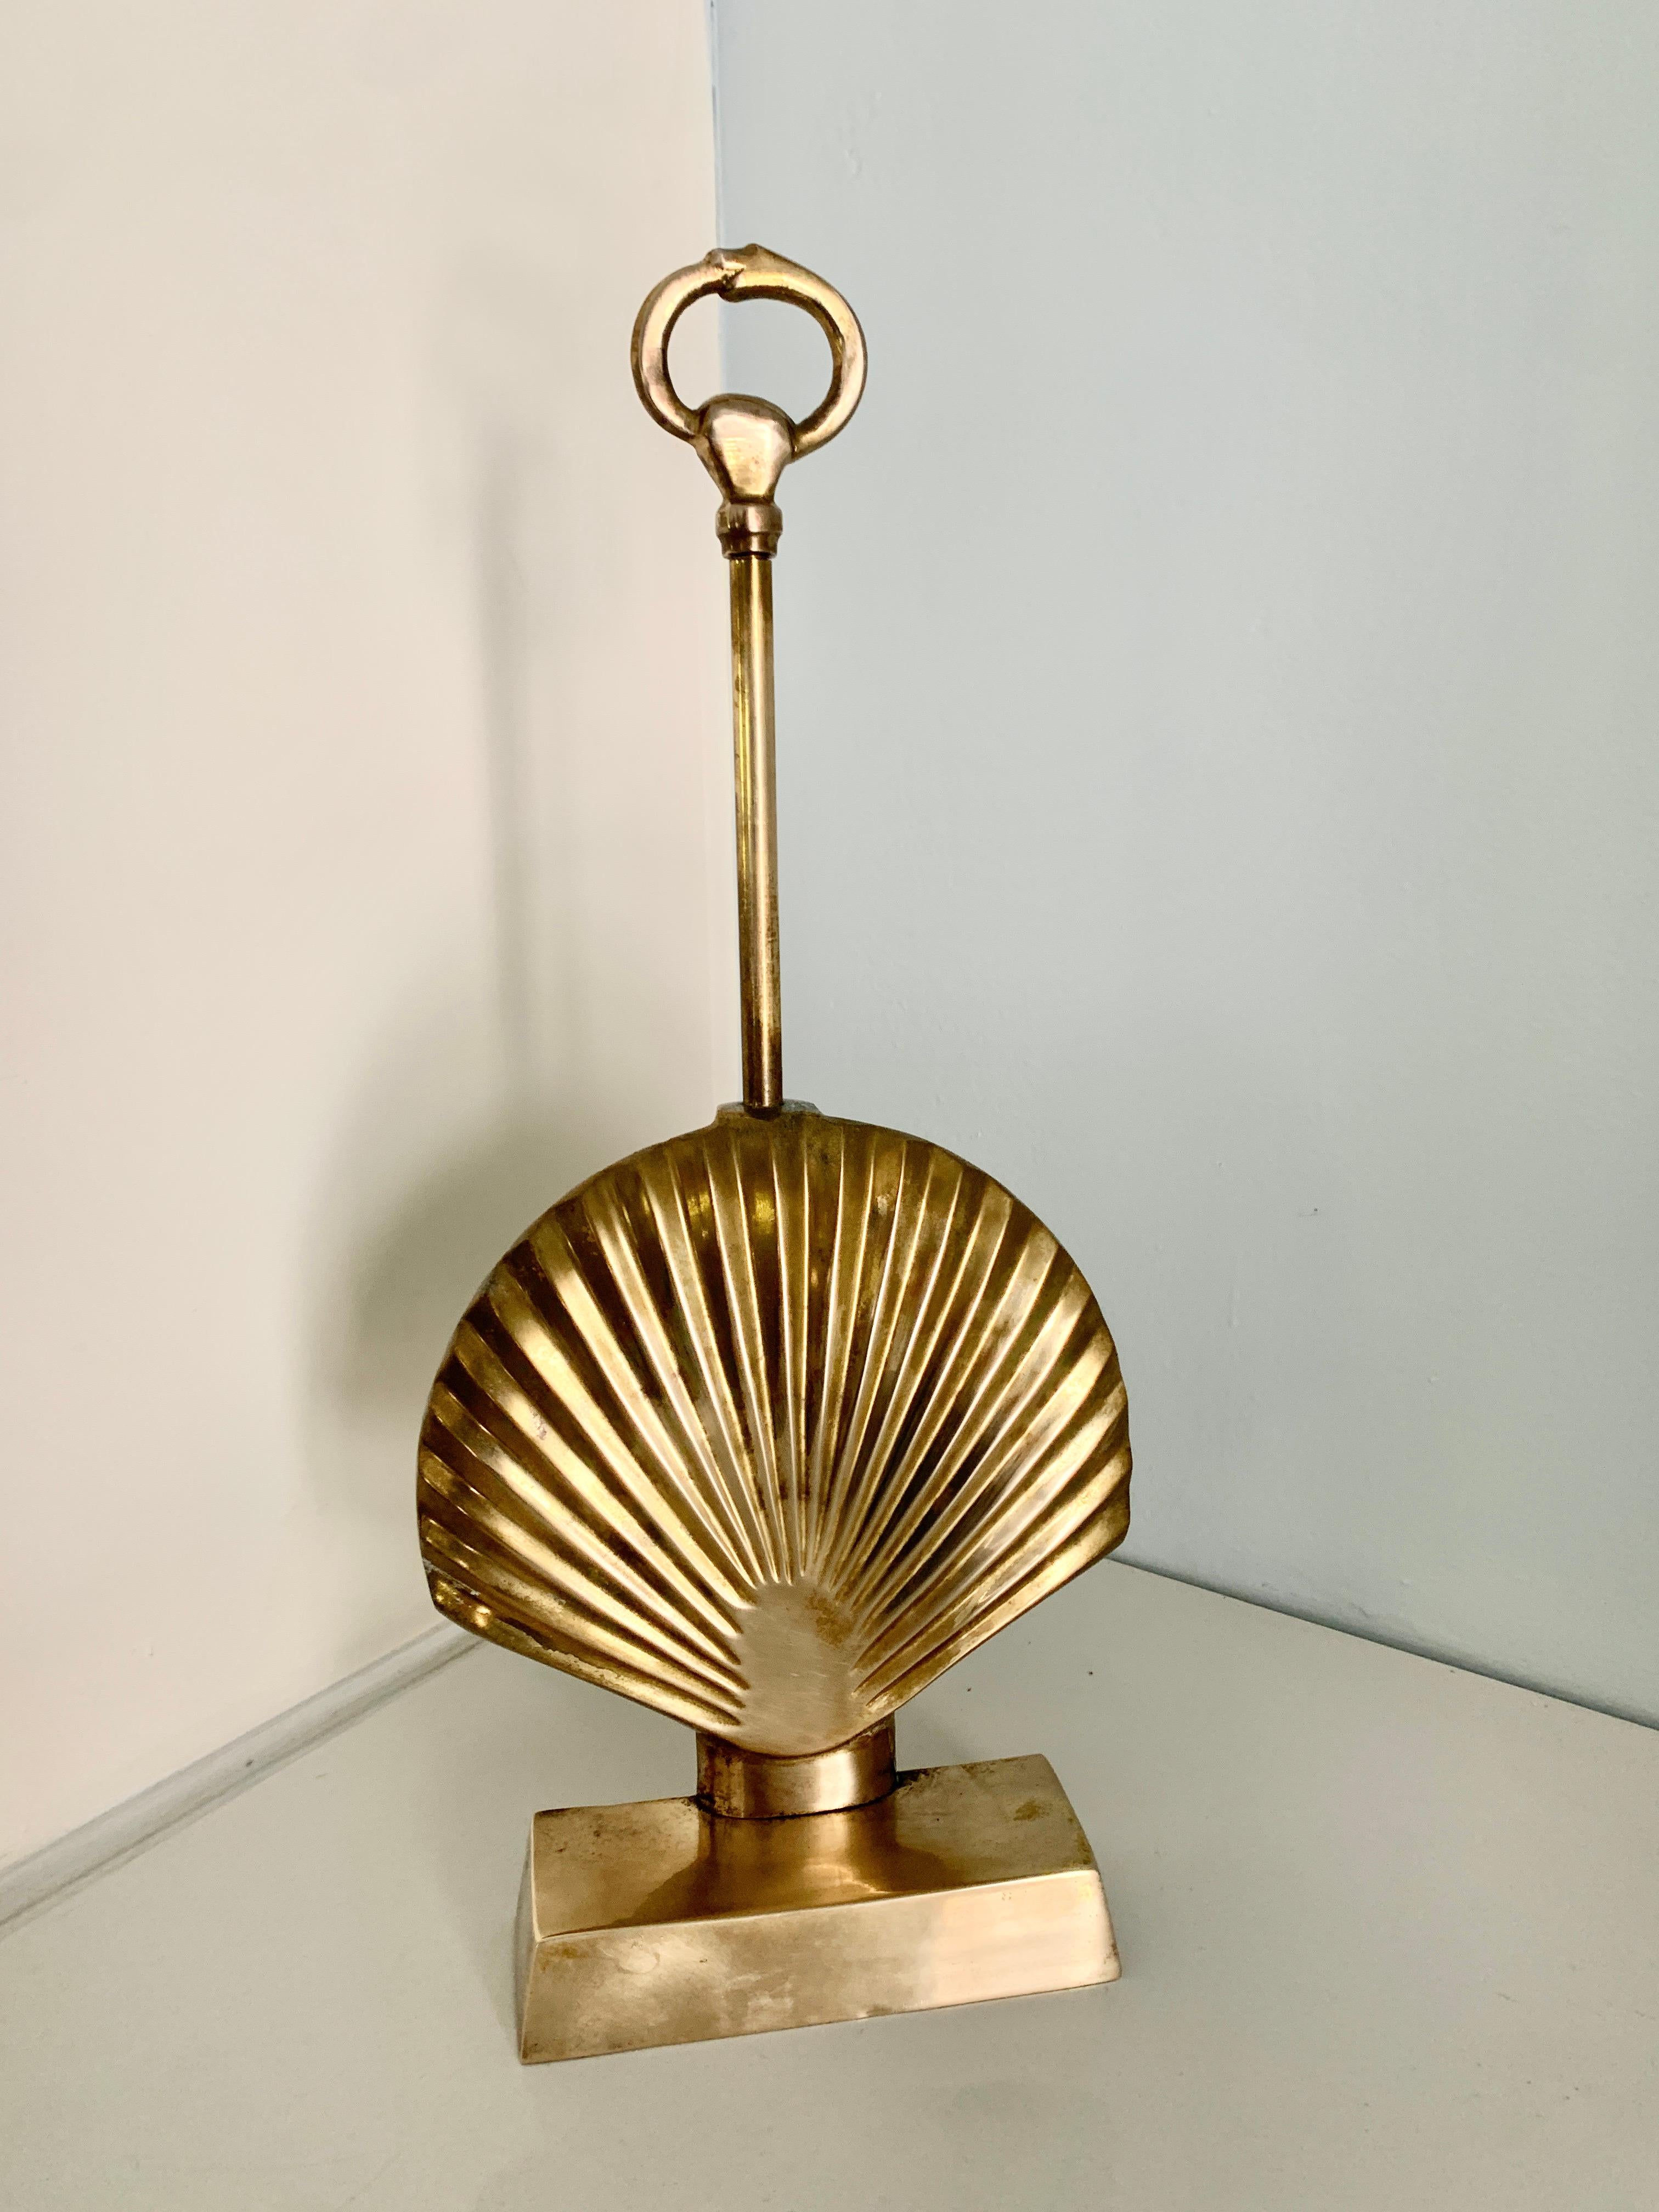 A solid and heavy Brass Shell Shape door stop with handle. Door stops are essential when a breeze coming through your space continually slams a door shut, or in this case, we also recommend a purely decorative stylish stop. 

With many stops